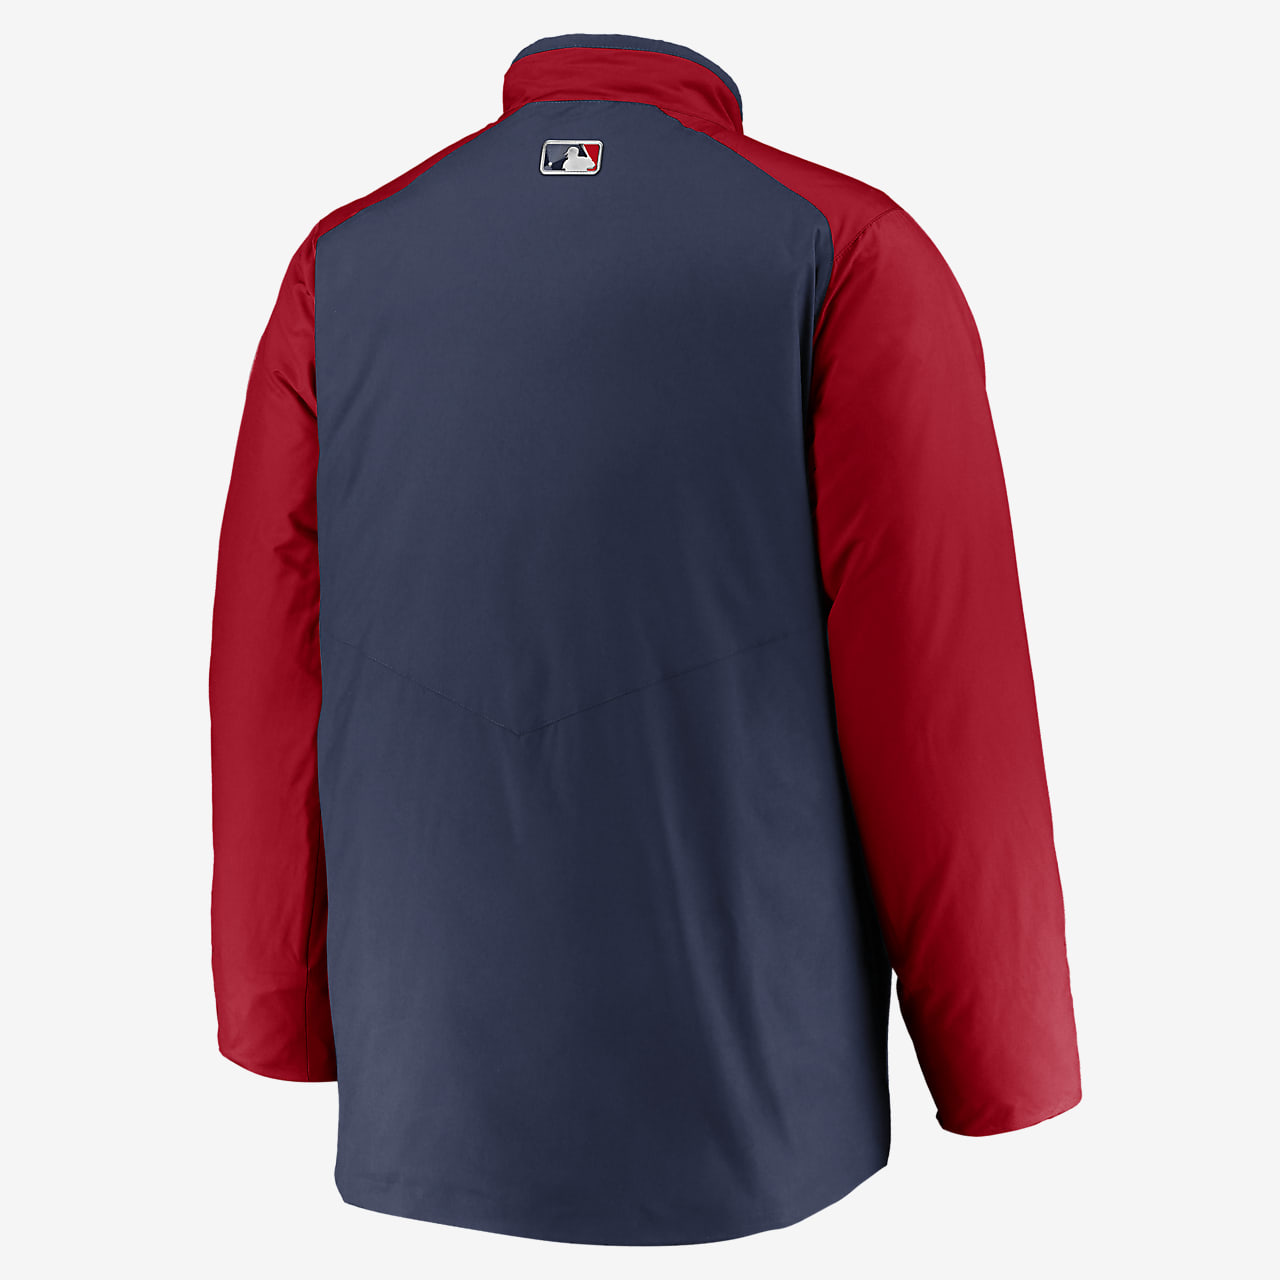 Nike City Connect Dugout (MLB Boston Red Sox) Men's Full-Zip